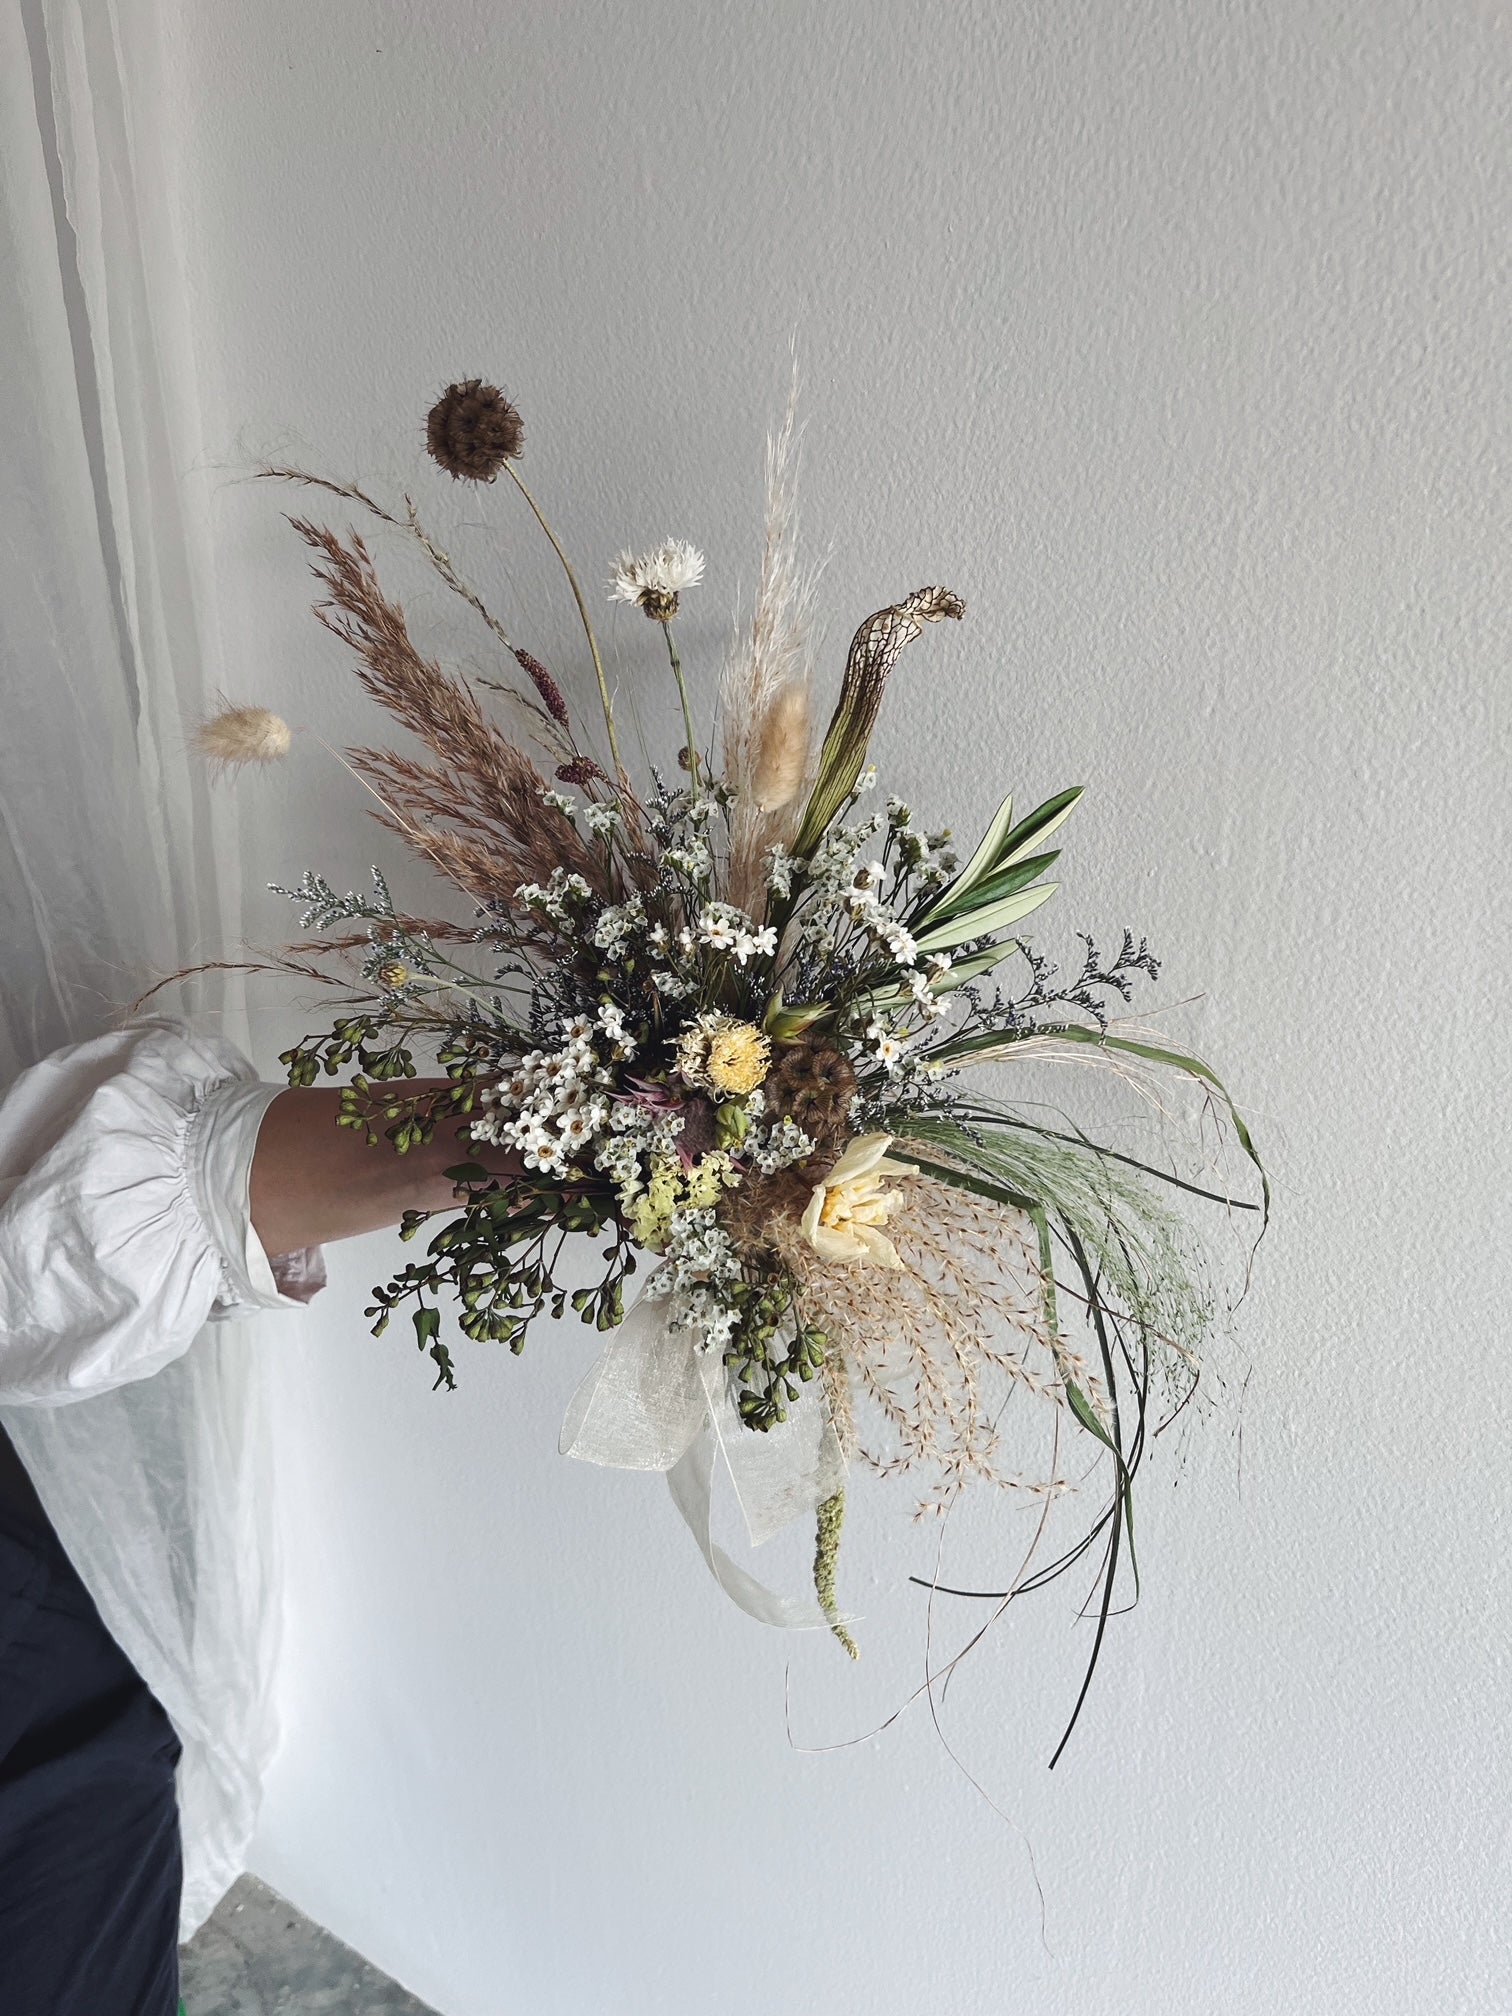 The Dried Bridesmaid Bouquet